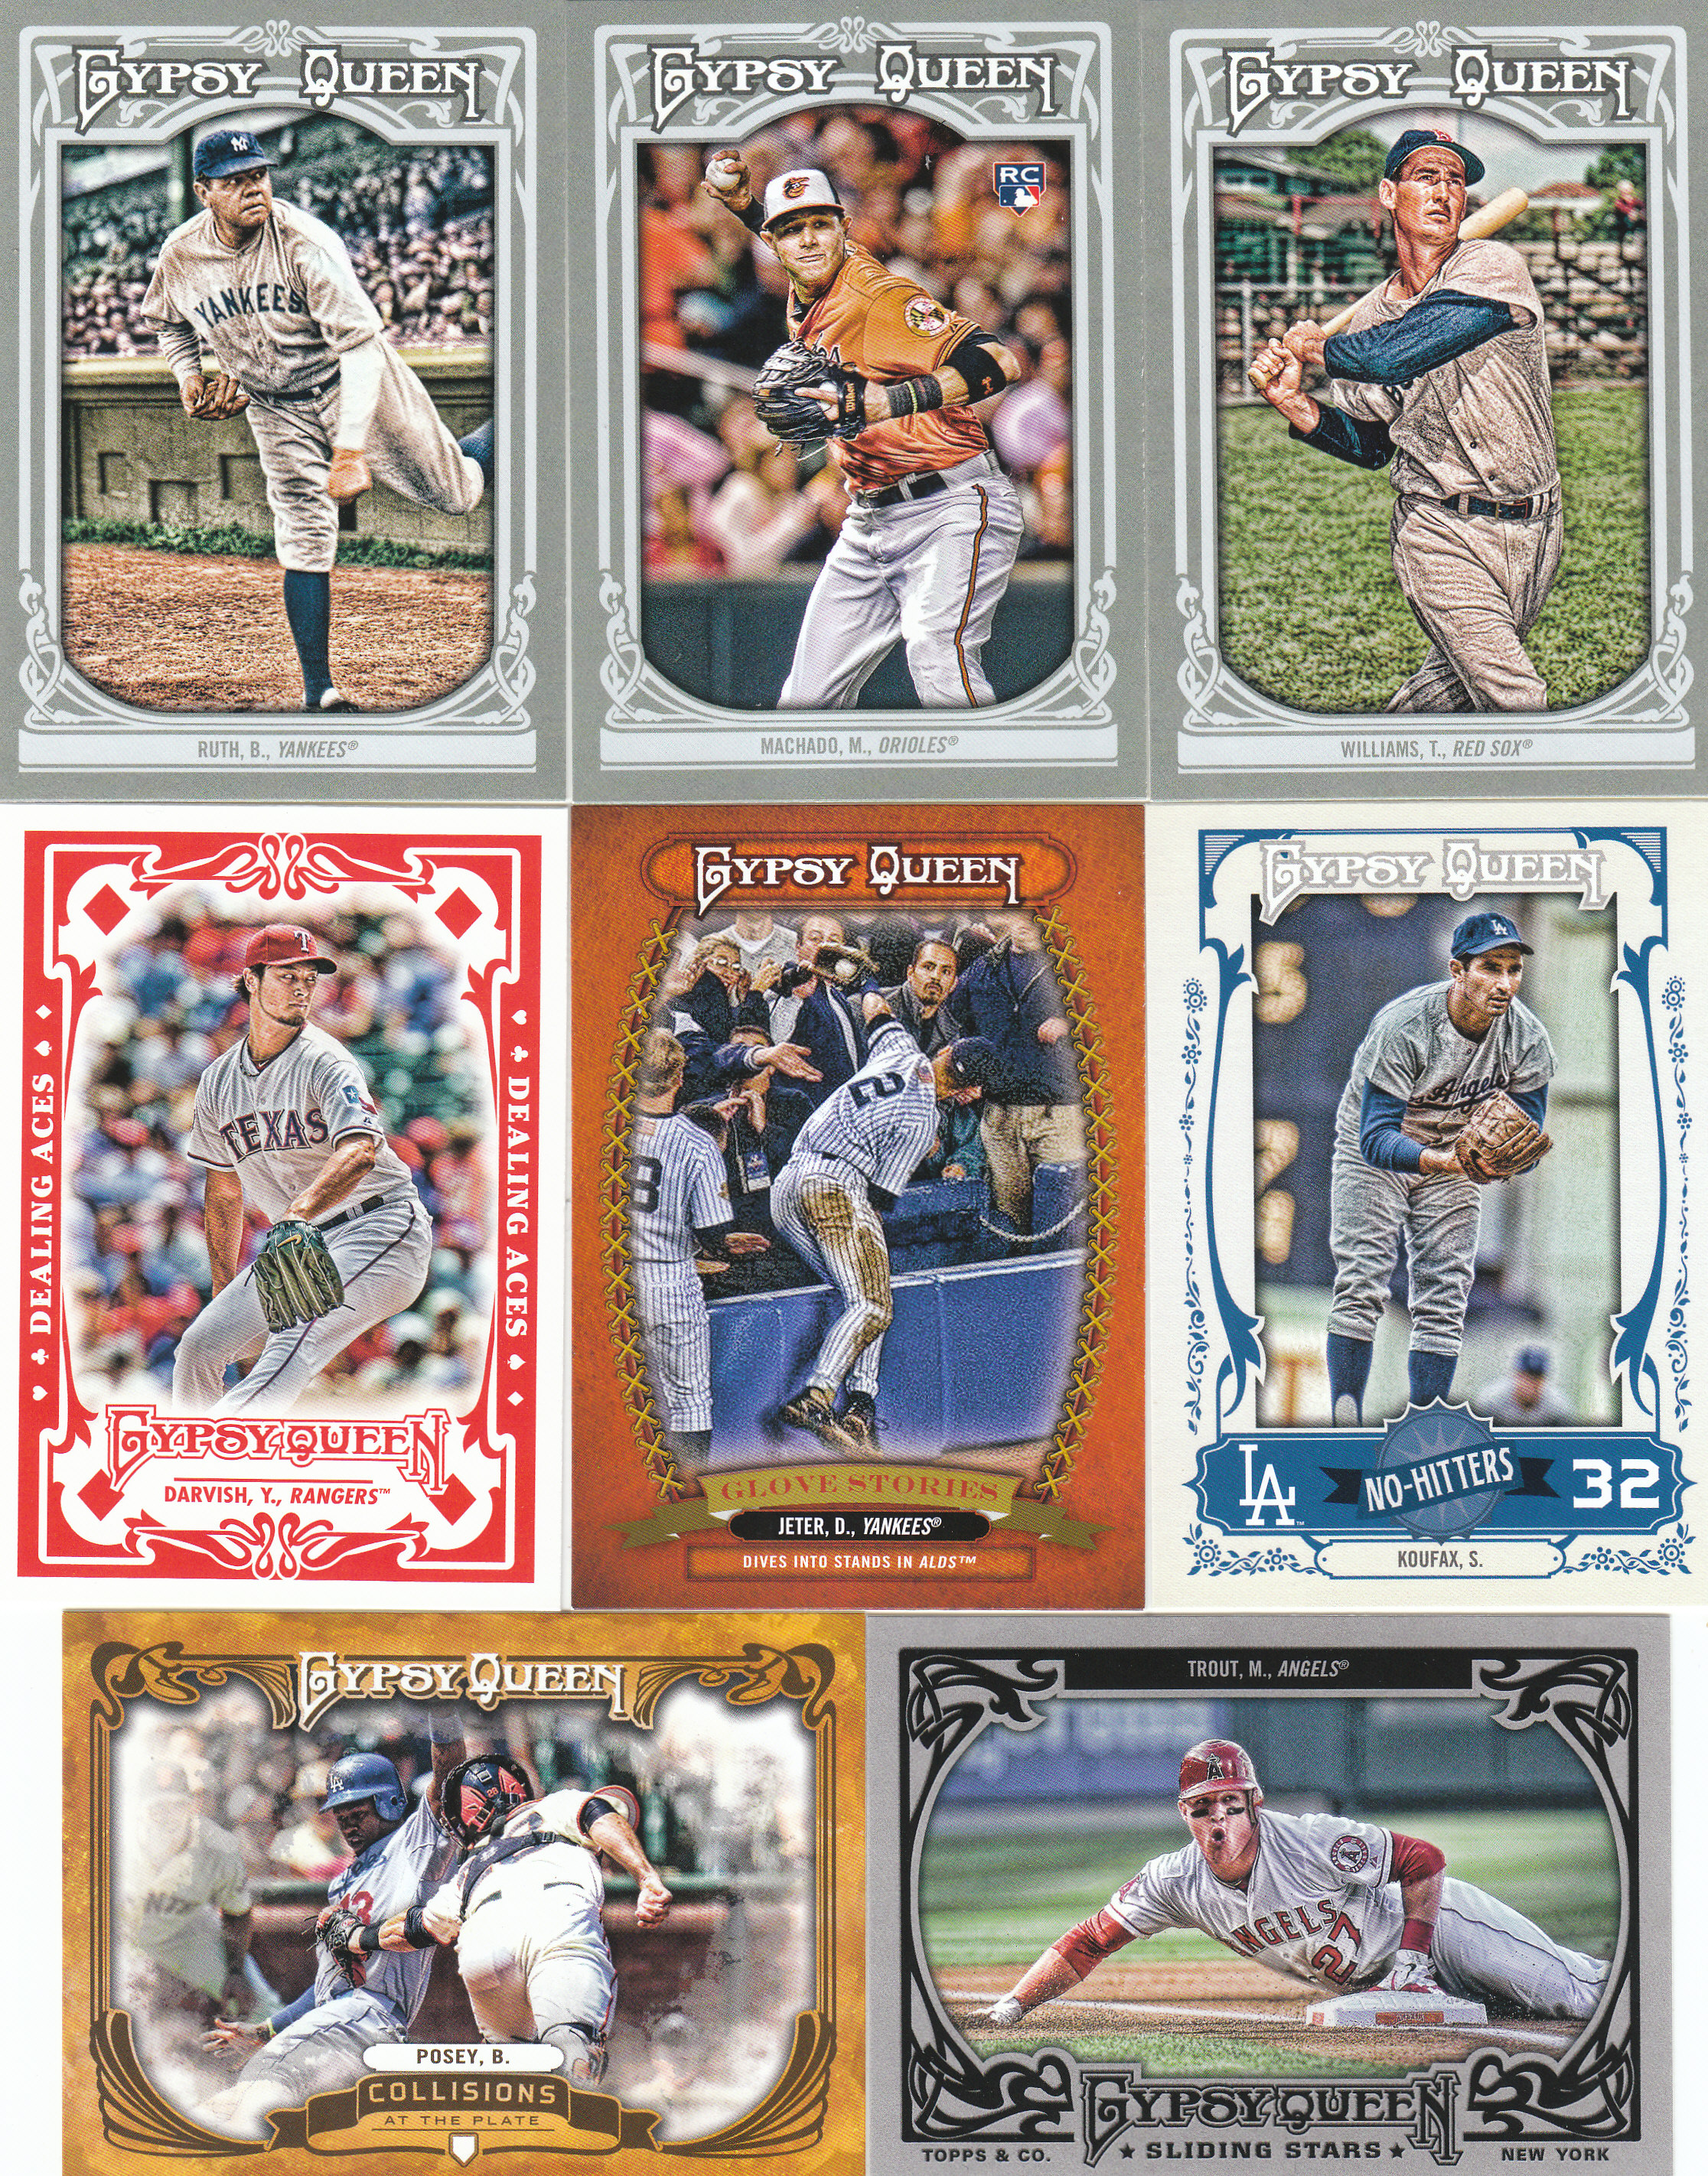 2013 Topps Gypsy Queen Baseball Master Set 420 Cards